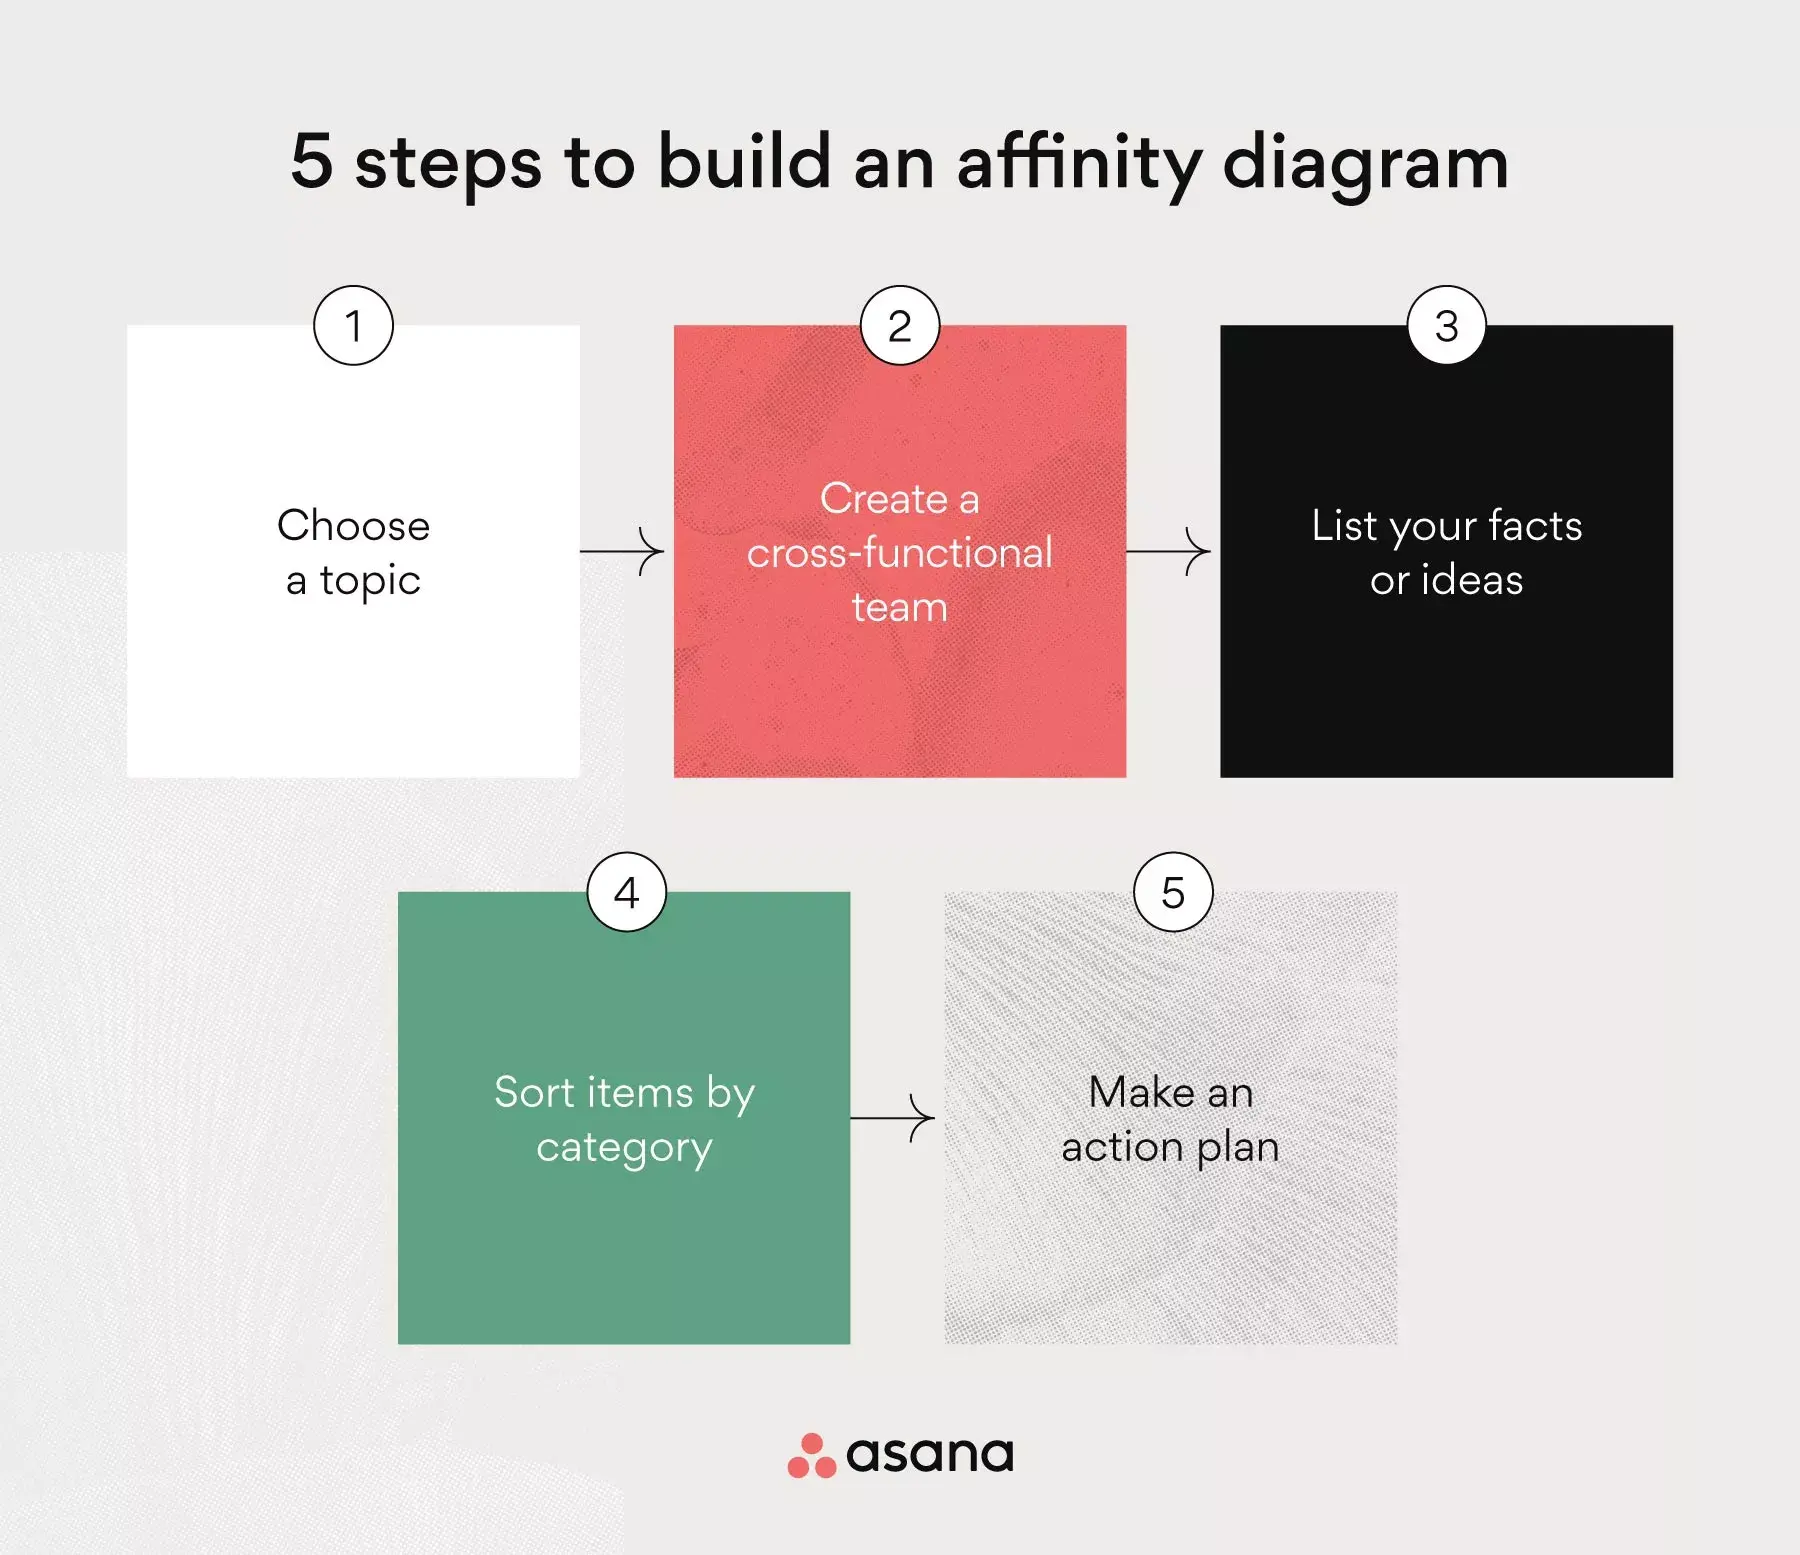 [inline illustration] 5 steps to build an affinity diagram (infographic)